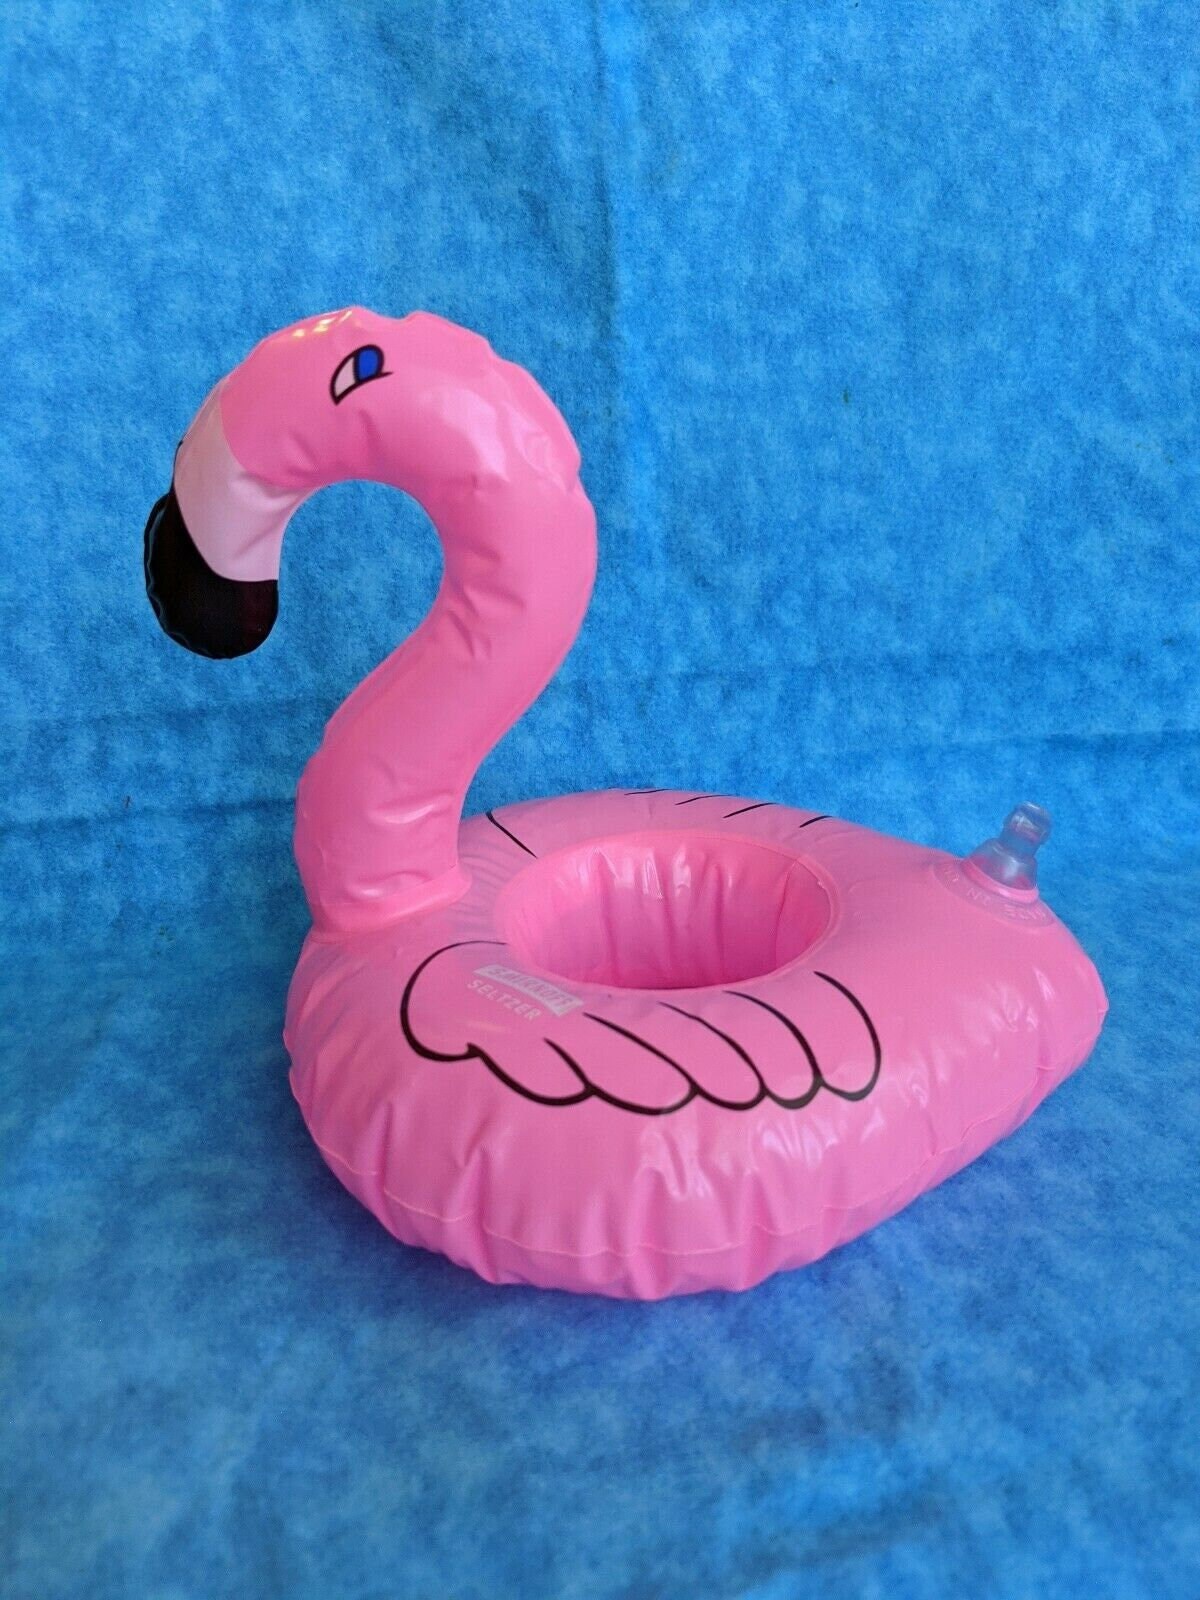 Drink Float. Personalized Inflatable Drink Holder. Inflatable Drink Holder.  Pool Drink Holder. Bachelorette Party. Flamingo Drink Float 